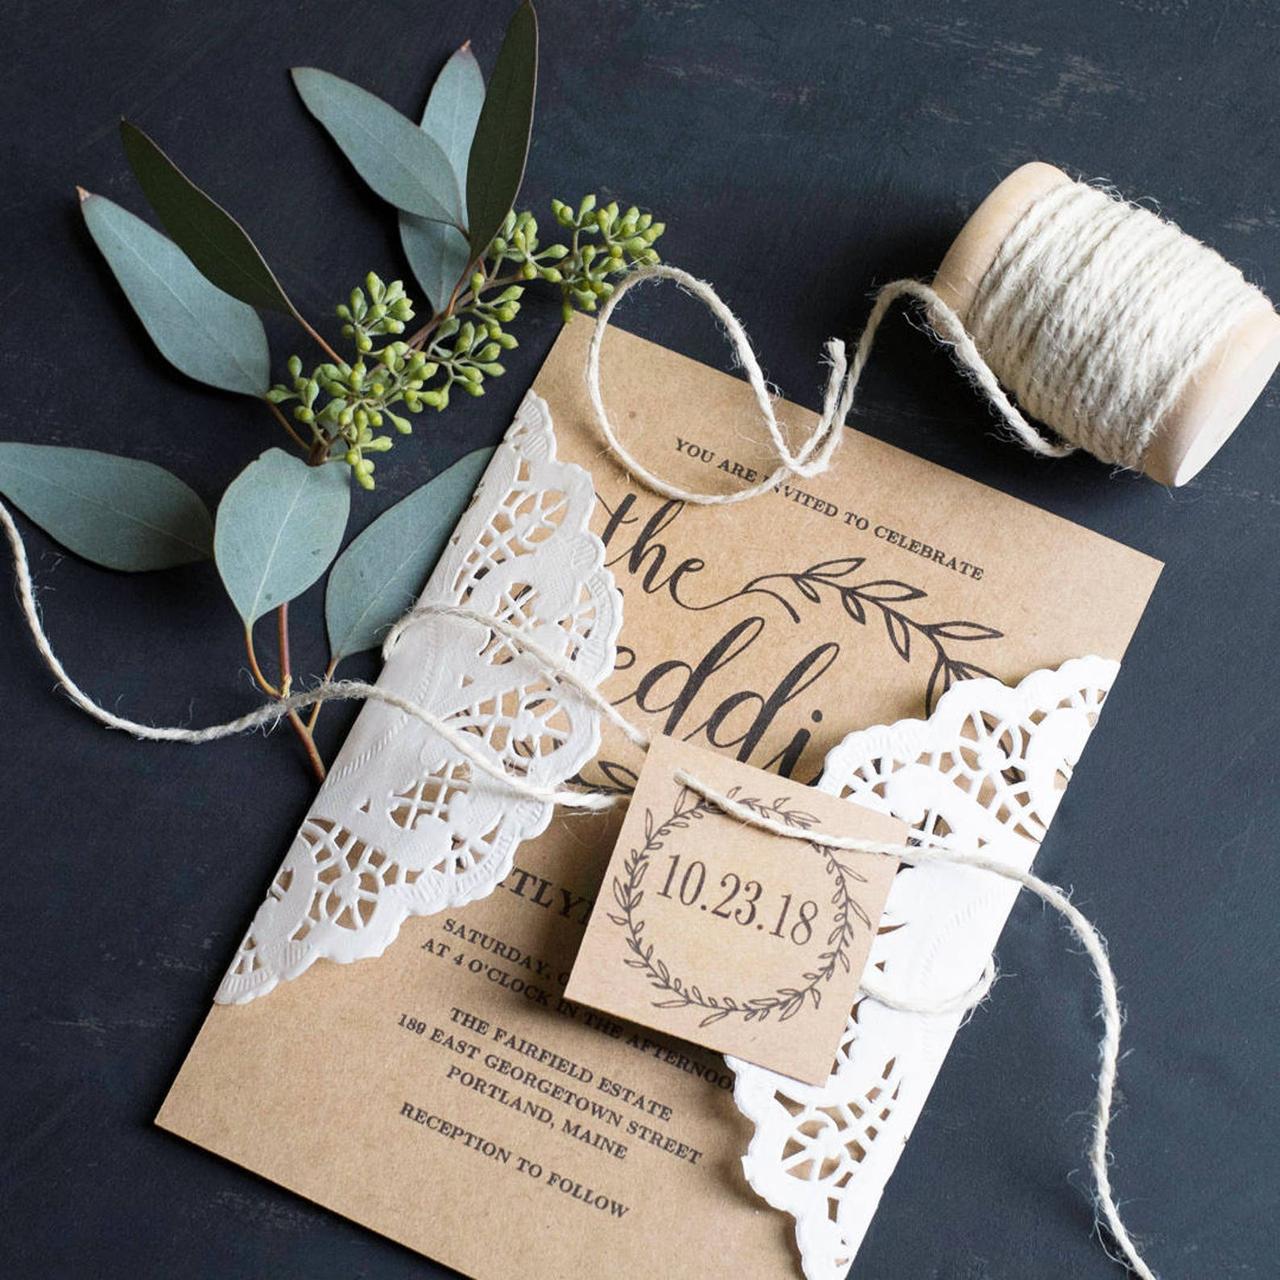 20 Vintage Wedding Invitation Ideas to Inspire Your Own